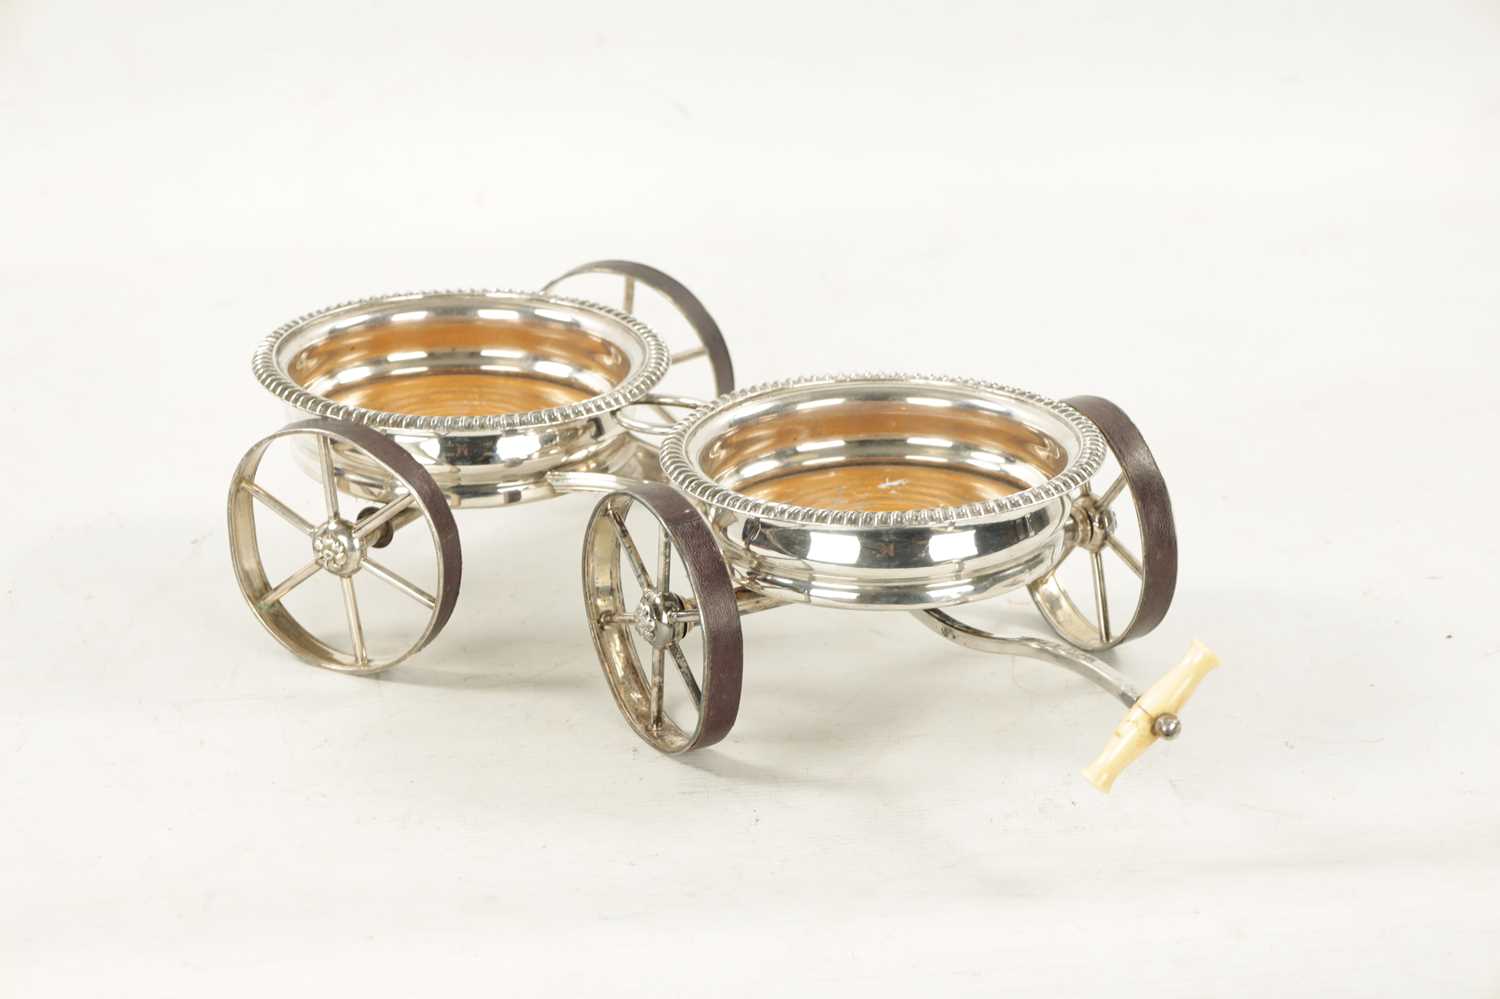 A 19TH CENTURY NOVELTY SILVER PLATED TABLE TOP DOUBLE COASTER TROLLEY FORMED AS A CARRIAGE - Image 7 of 7